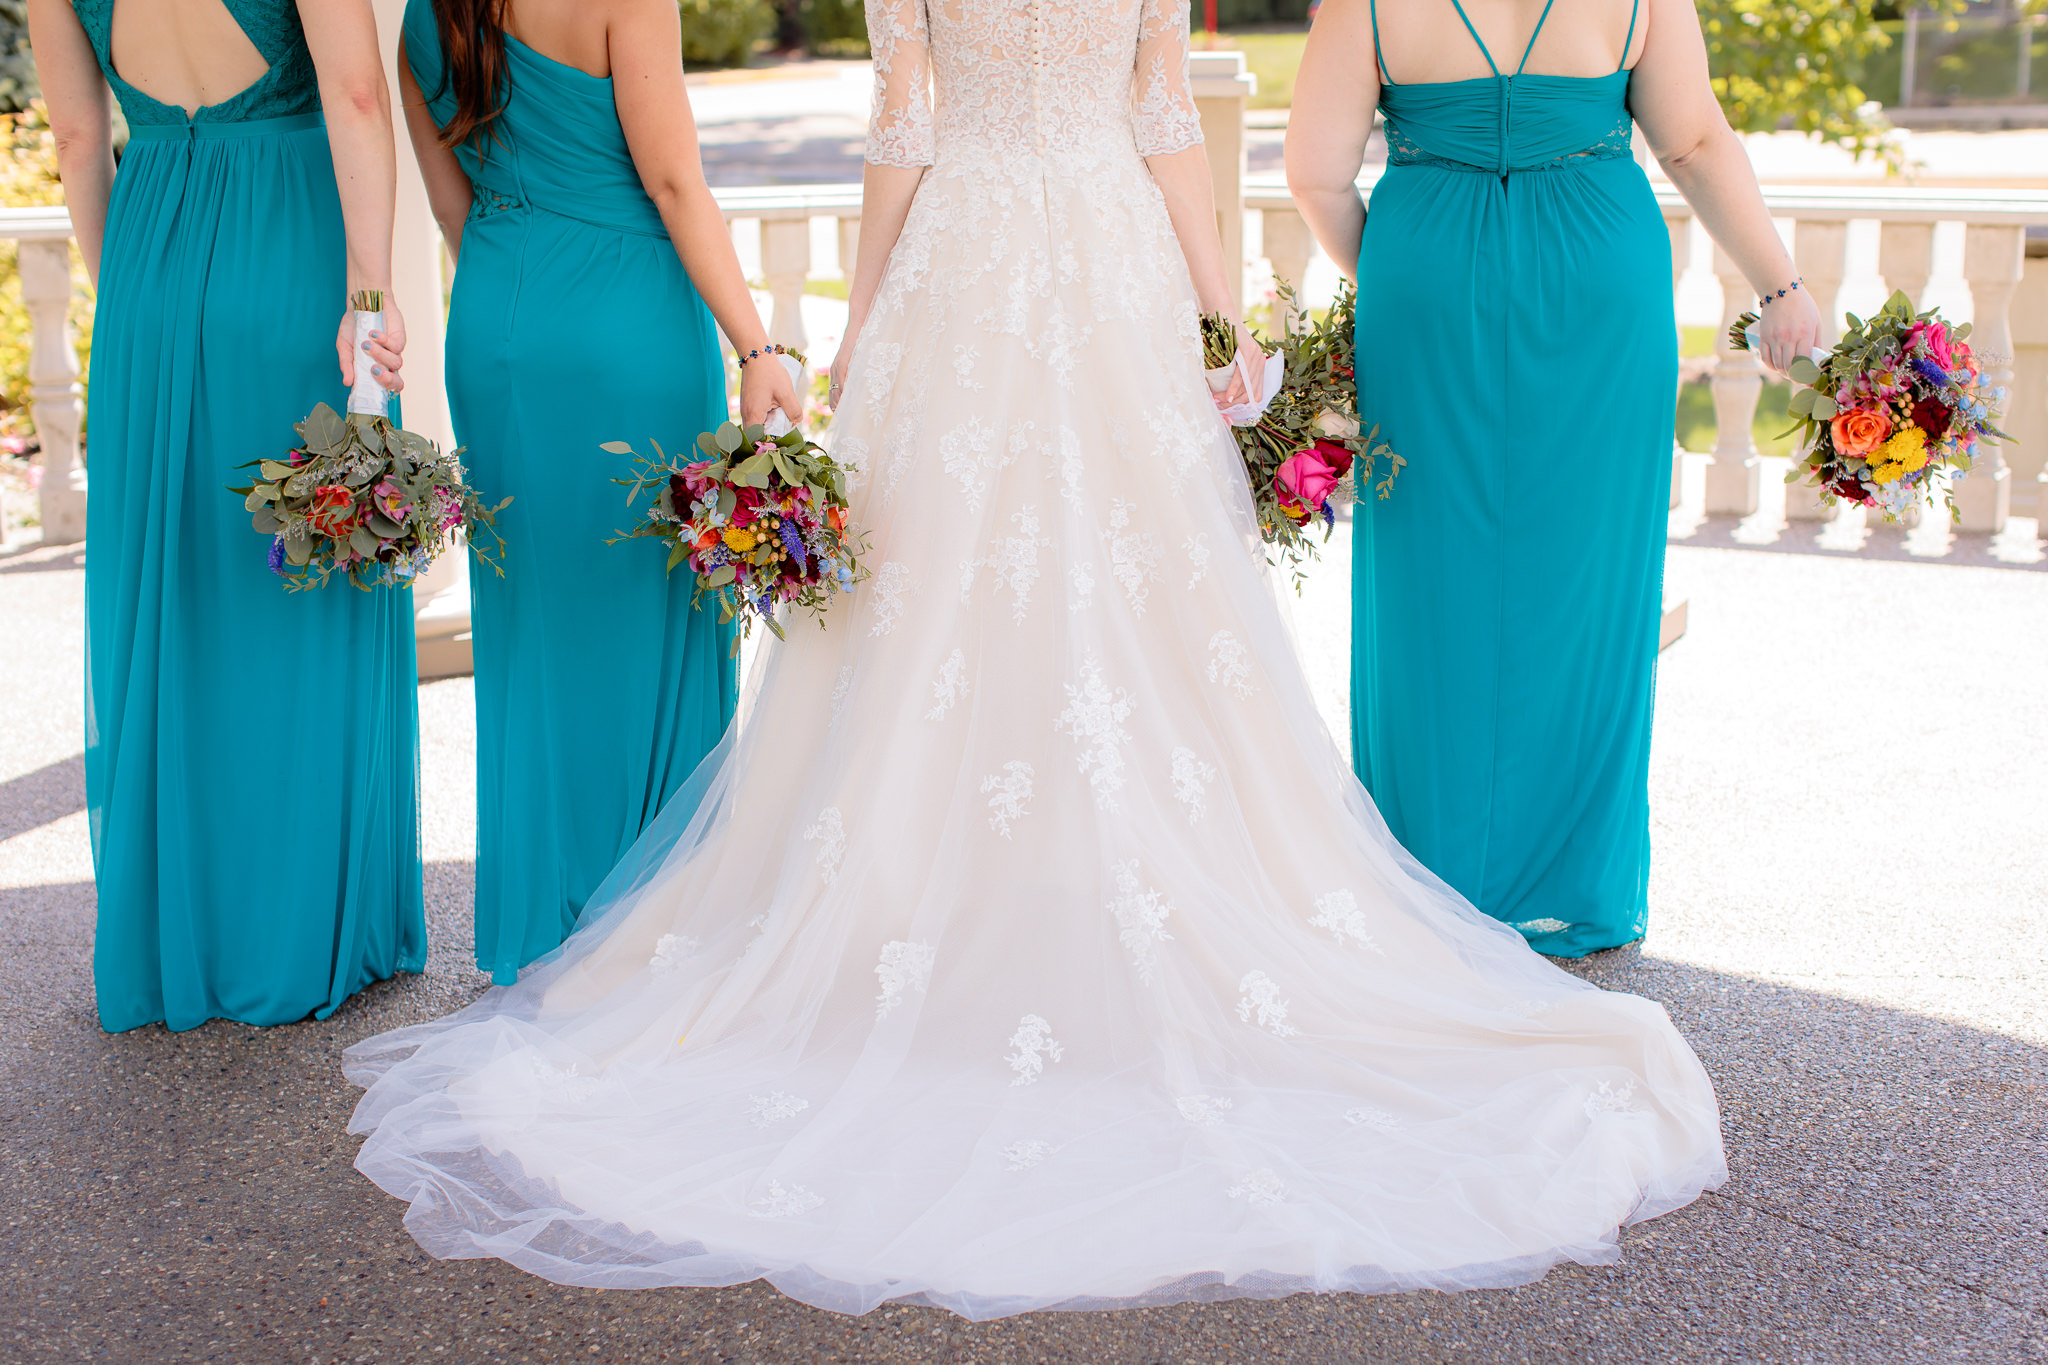 Bride's Maggie Sottero Bree wedding gown fanned out next to bridesmaids' turquoise dresses